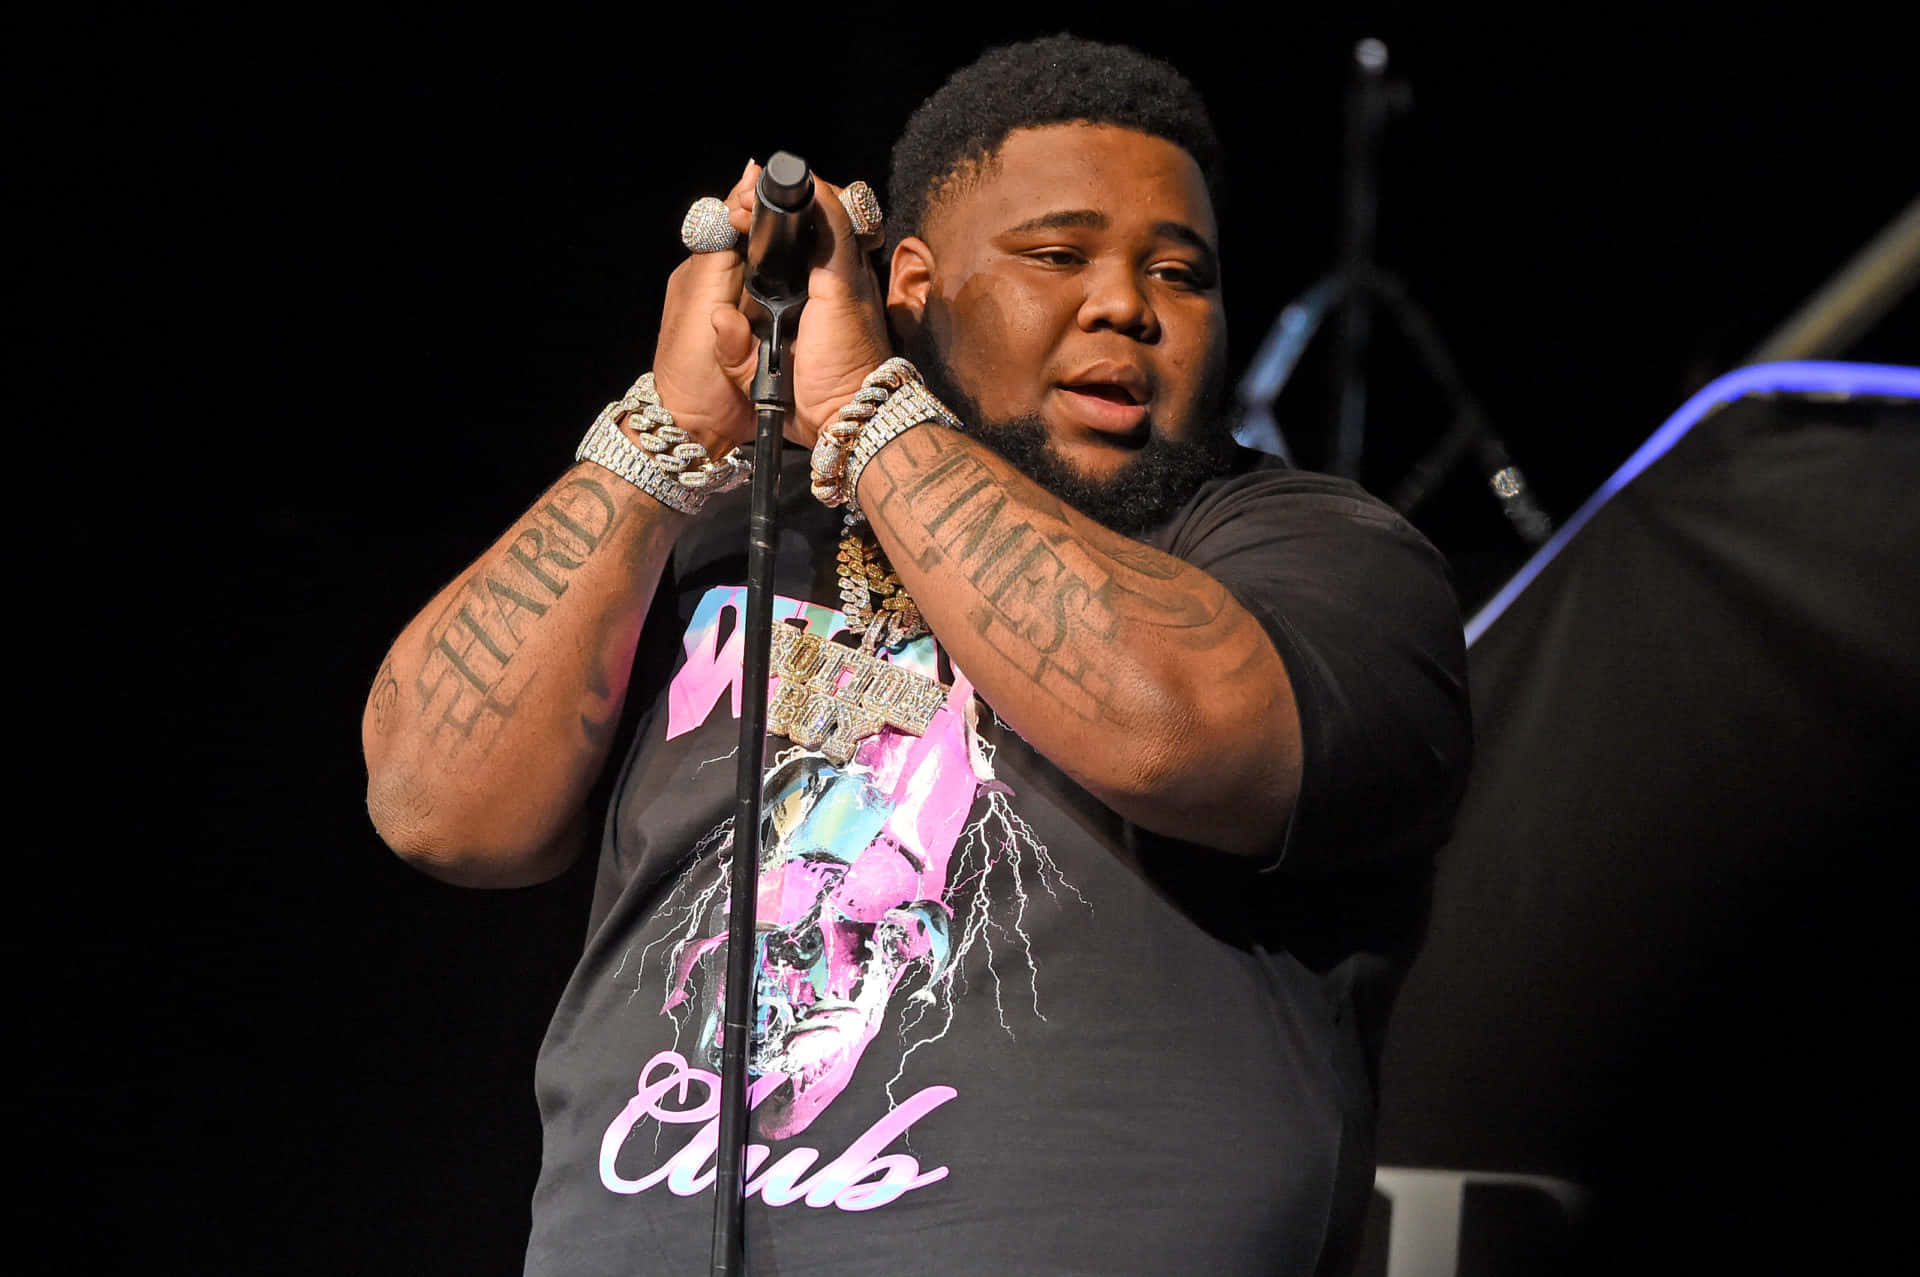 A Man With Tattoos On His Arms Is Holding A Microphone